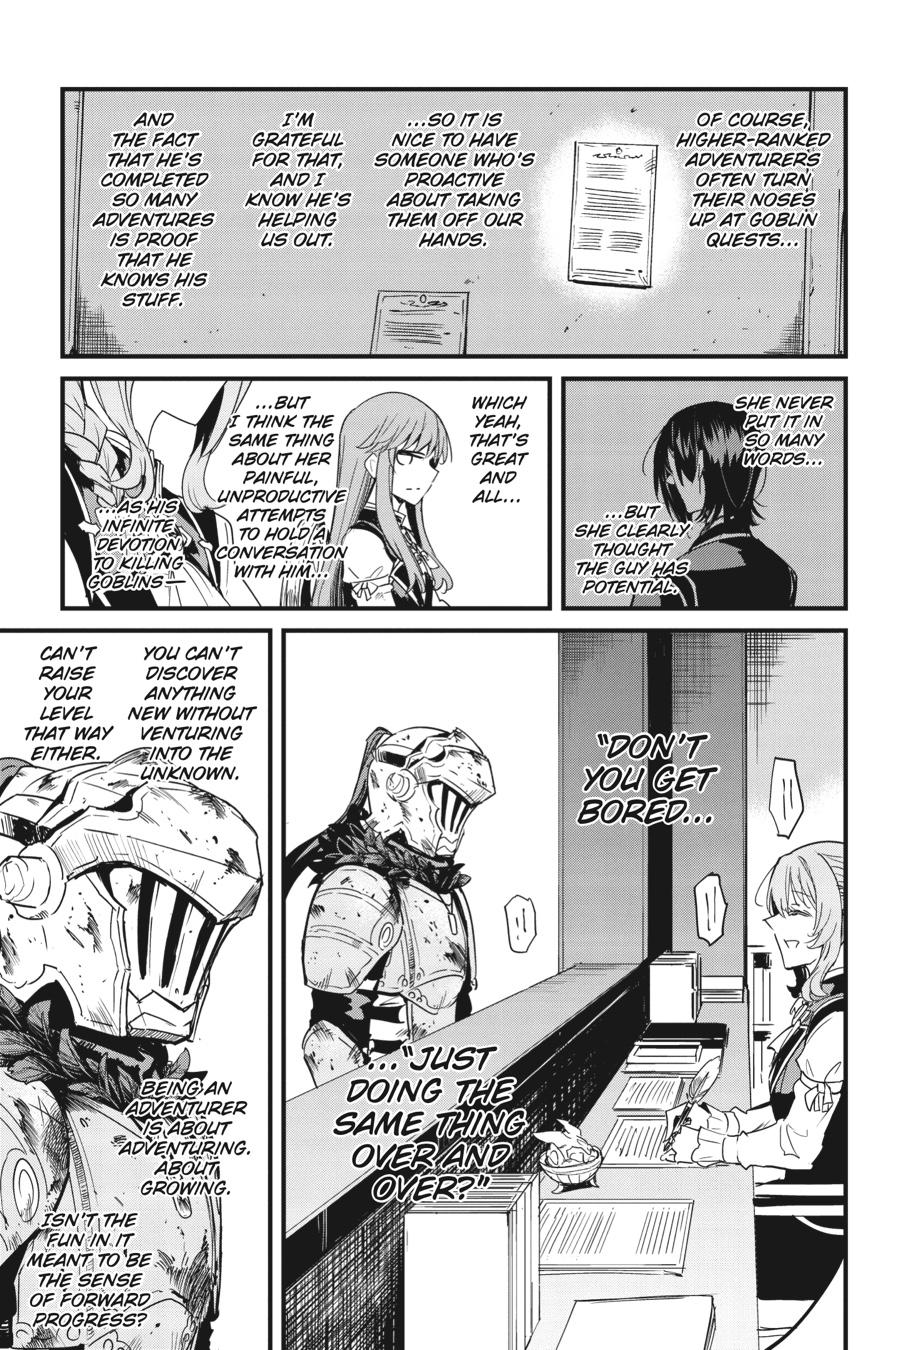 Goblin Slayer: Side Story Year One chapter 82 page 15